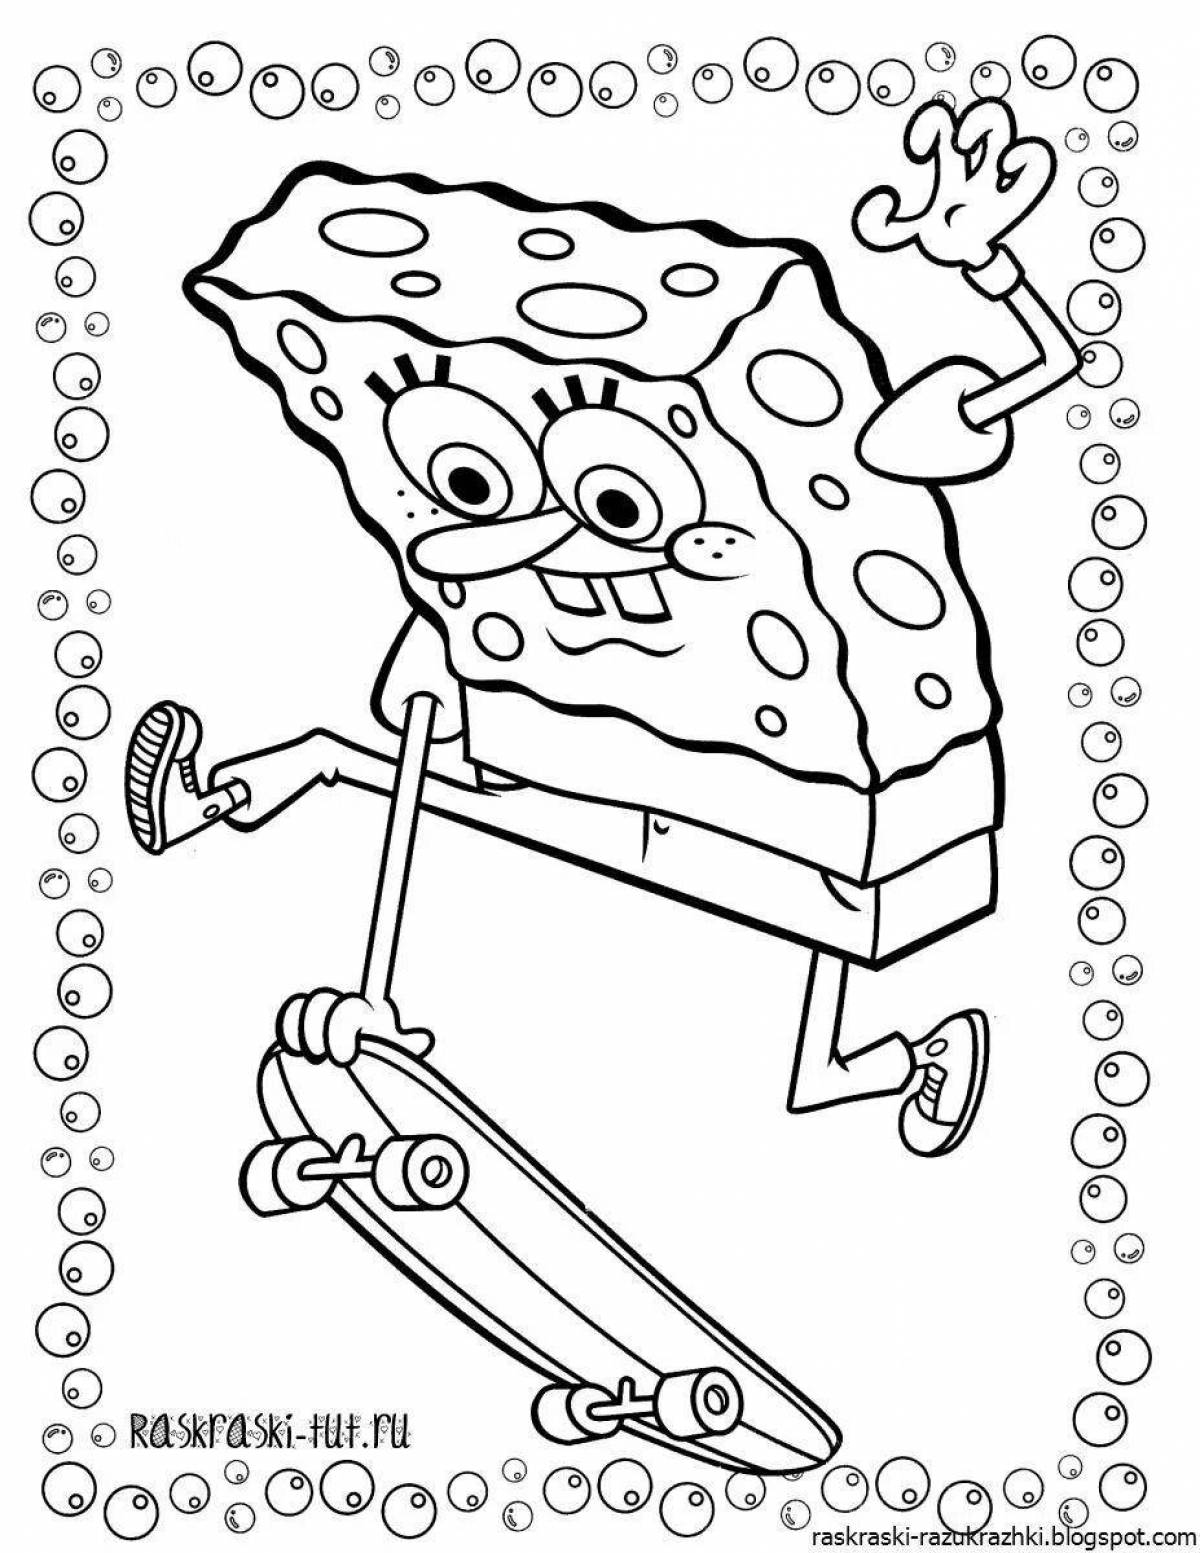 Colorful tvhead coloring page